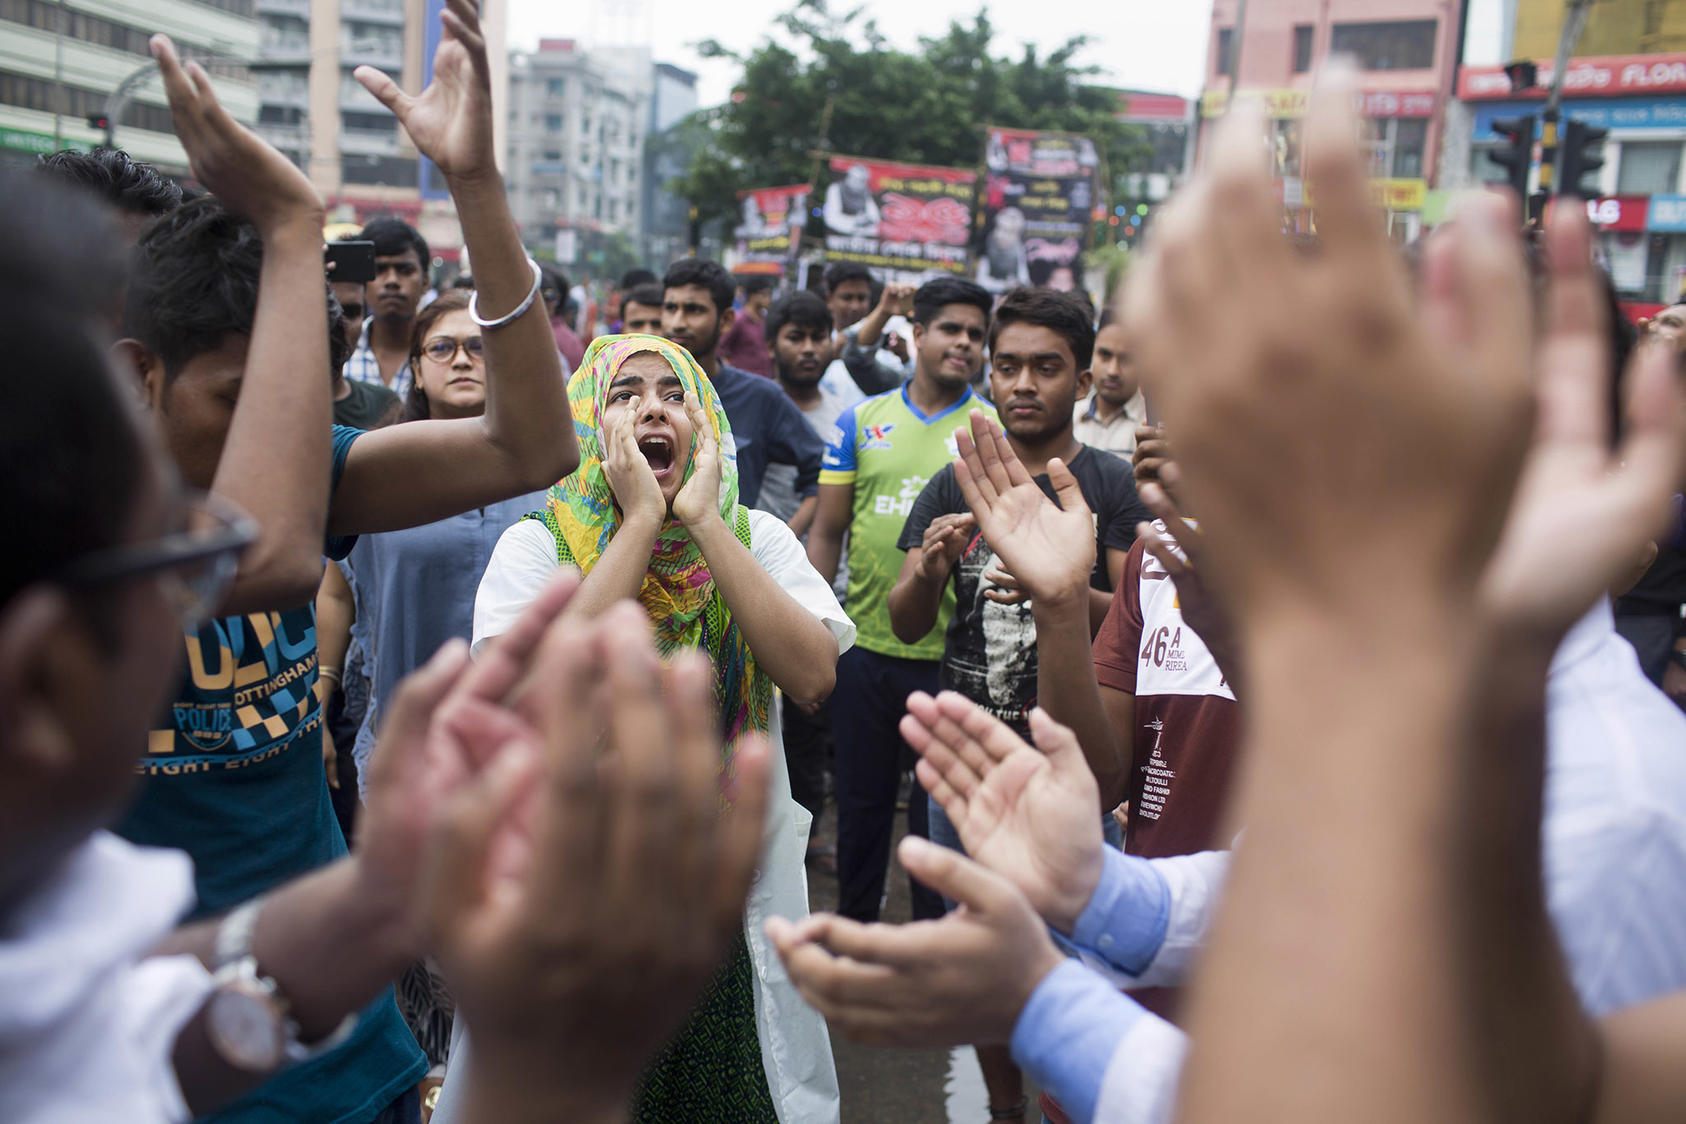 Students block a road in Dhaka, Bangladesh, on August 2, 2018, while protesting the death of two college students in a bus accident. Bangladeshi students have been active in demonstrations ranging from road safety to women’s rights. (A. M. Ahad/AP)